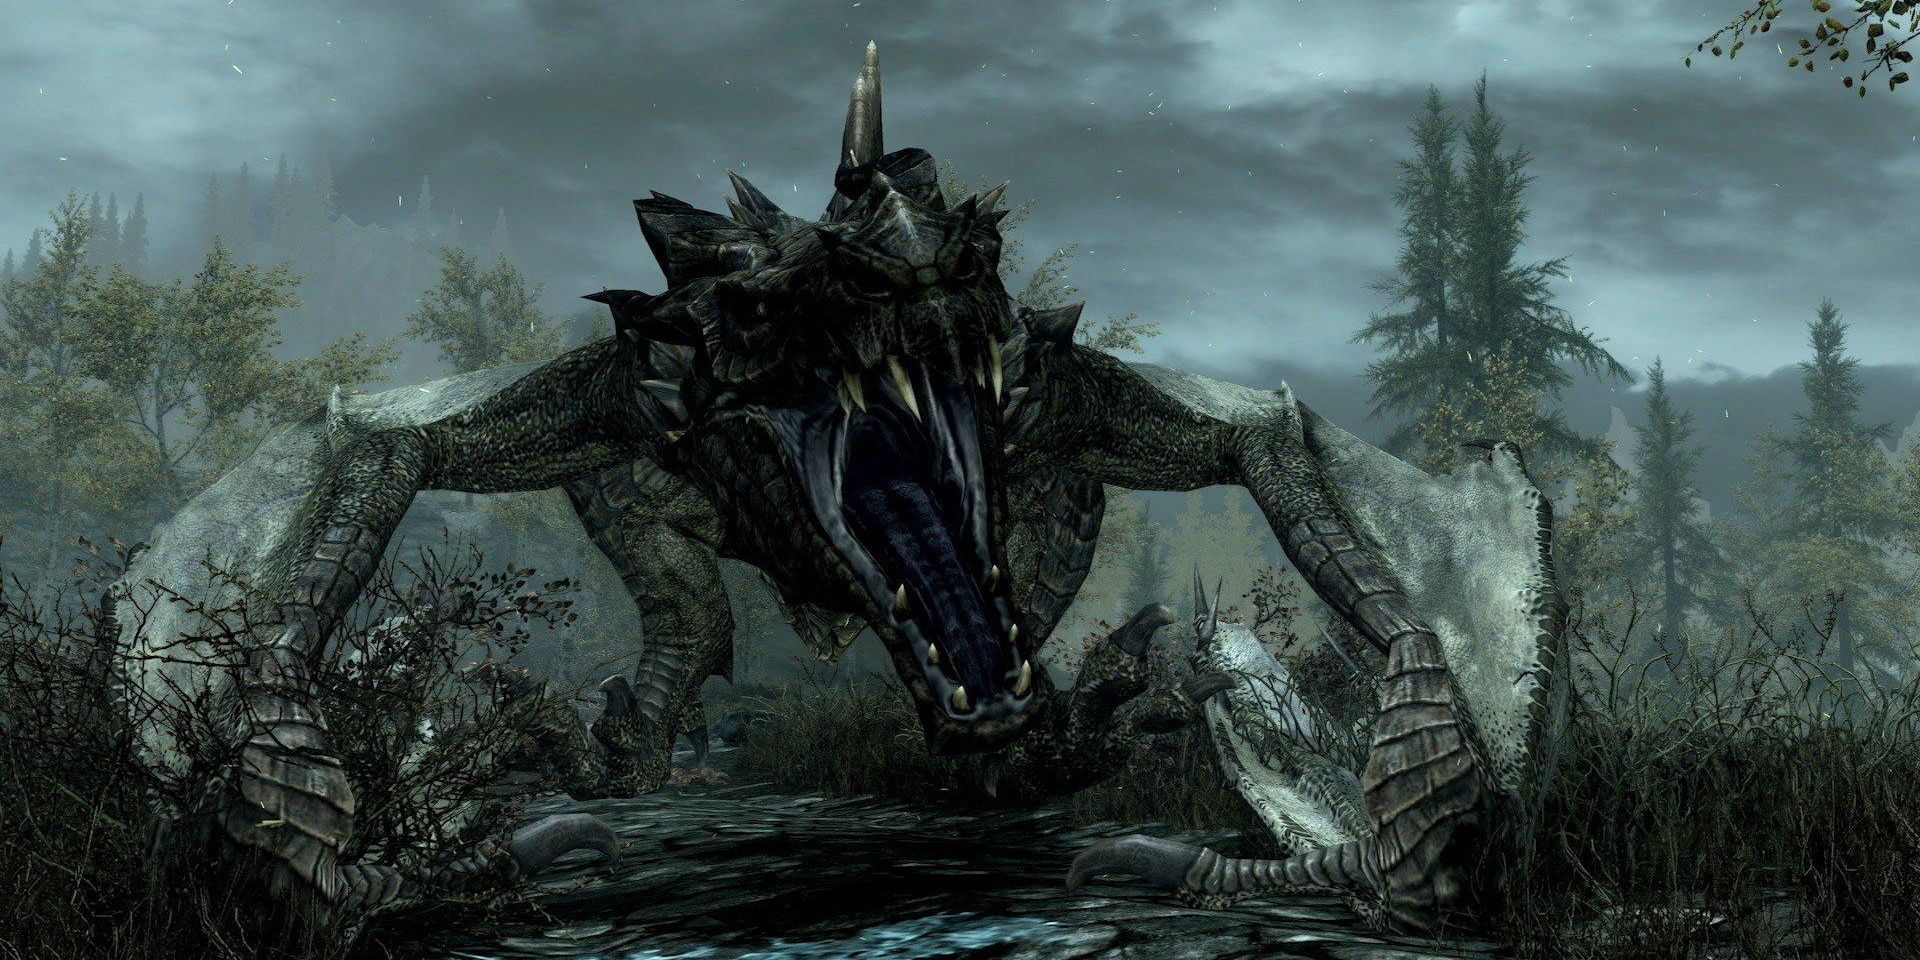 A screenshot from Skyrim showing one of the game's dragons.